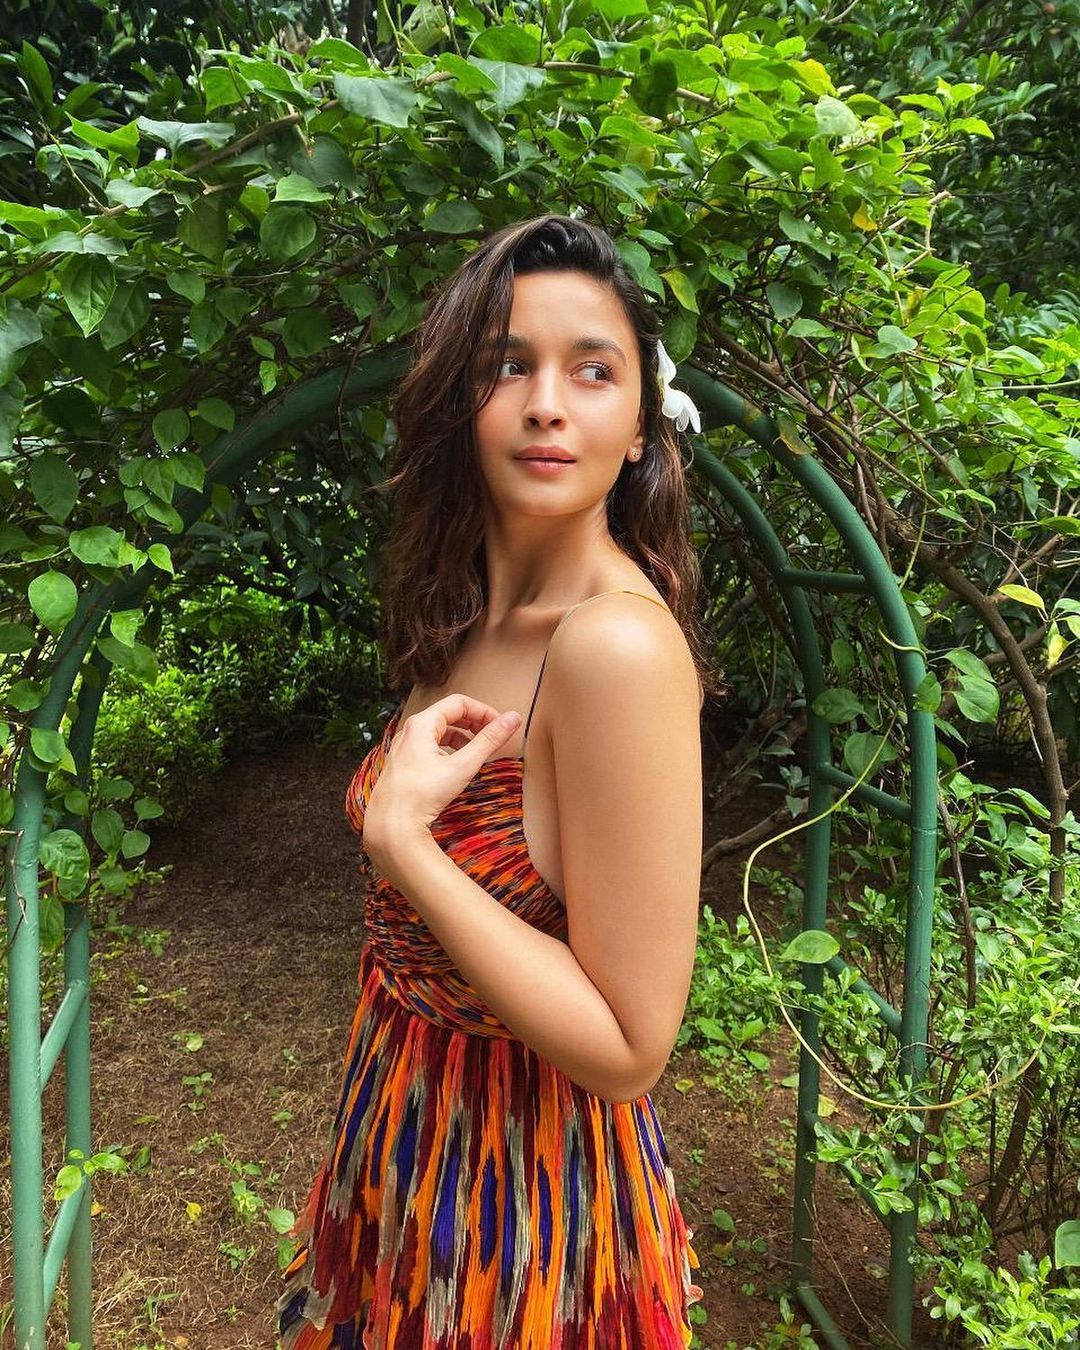 Hollywood calling for Alia Bhatt? Actress signs with international talent agency WME which also manages Freida Pinto